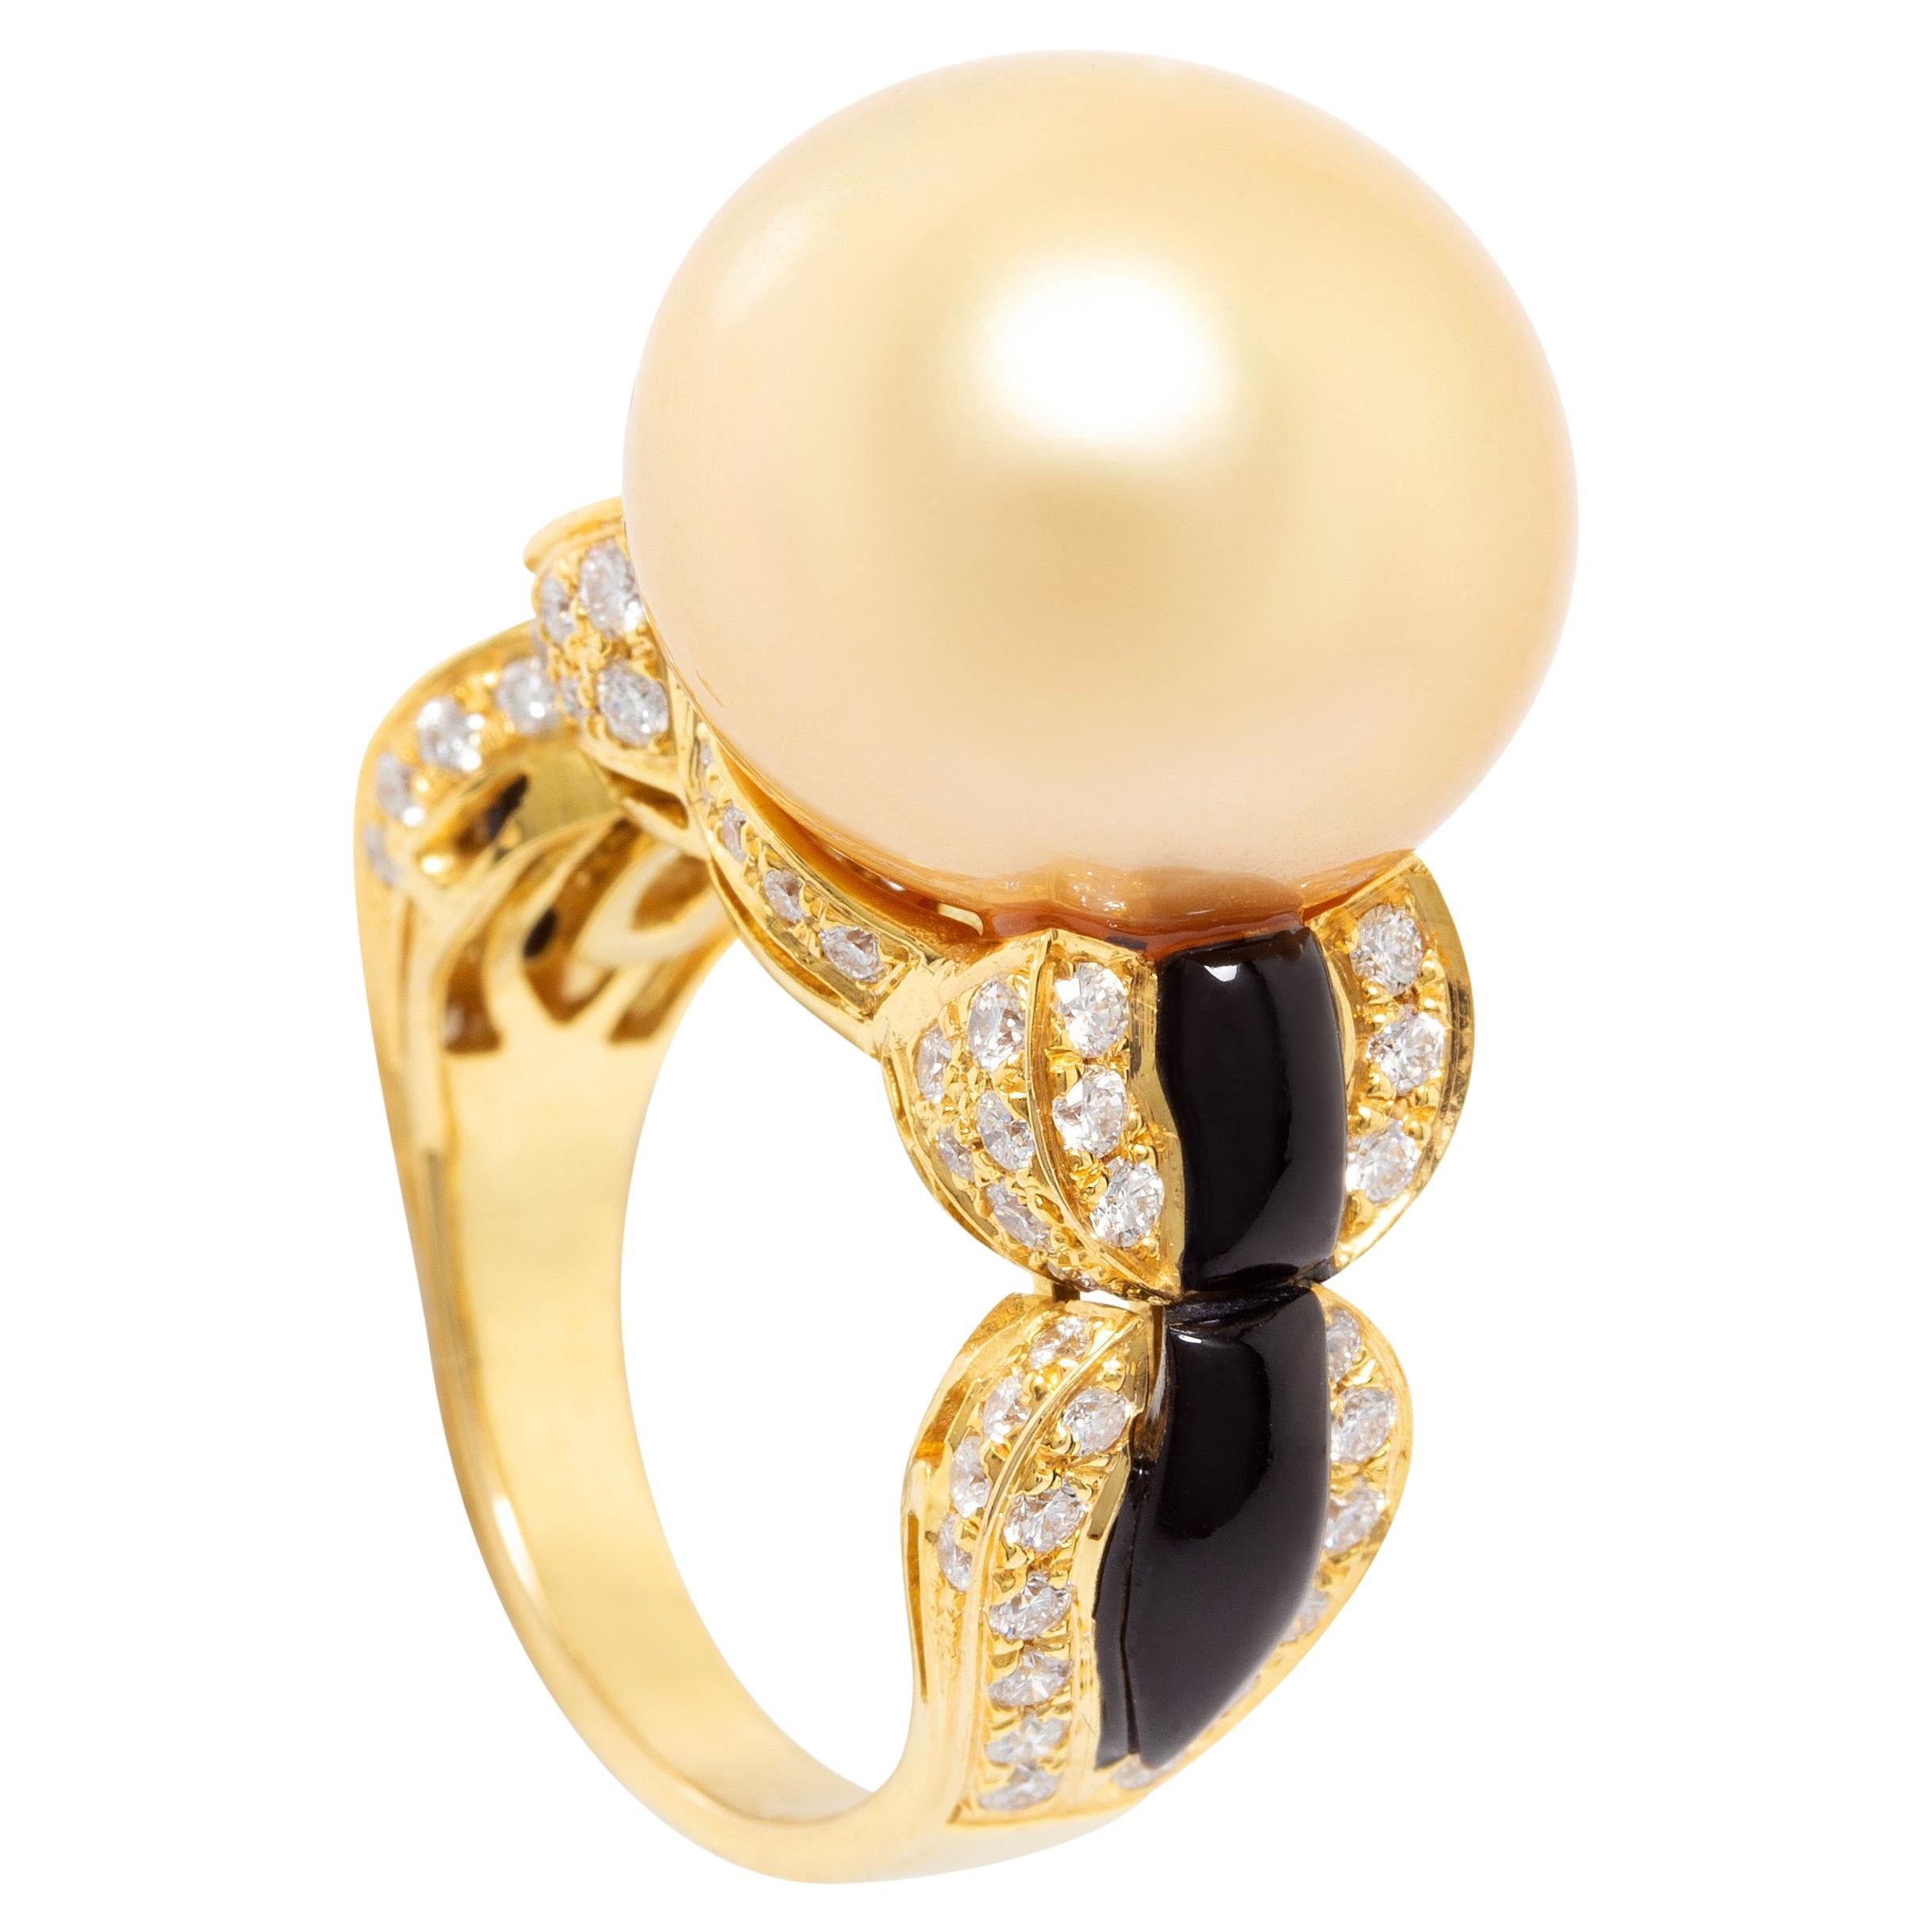 Ella Gafter 16mm Golden Pearl Diamond Onyx Ring  For Sale